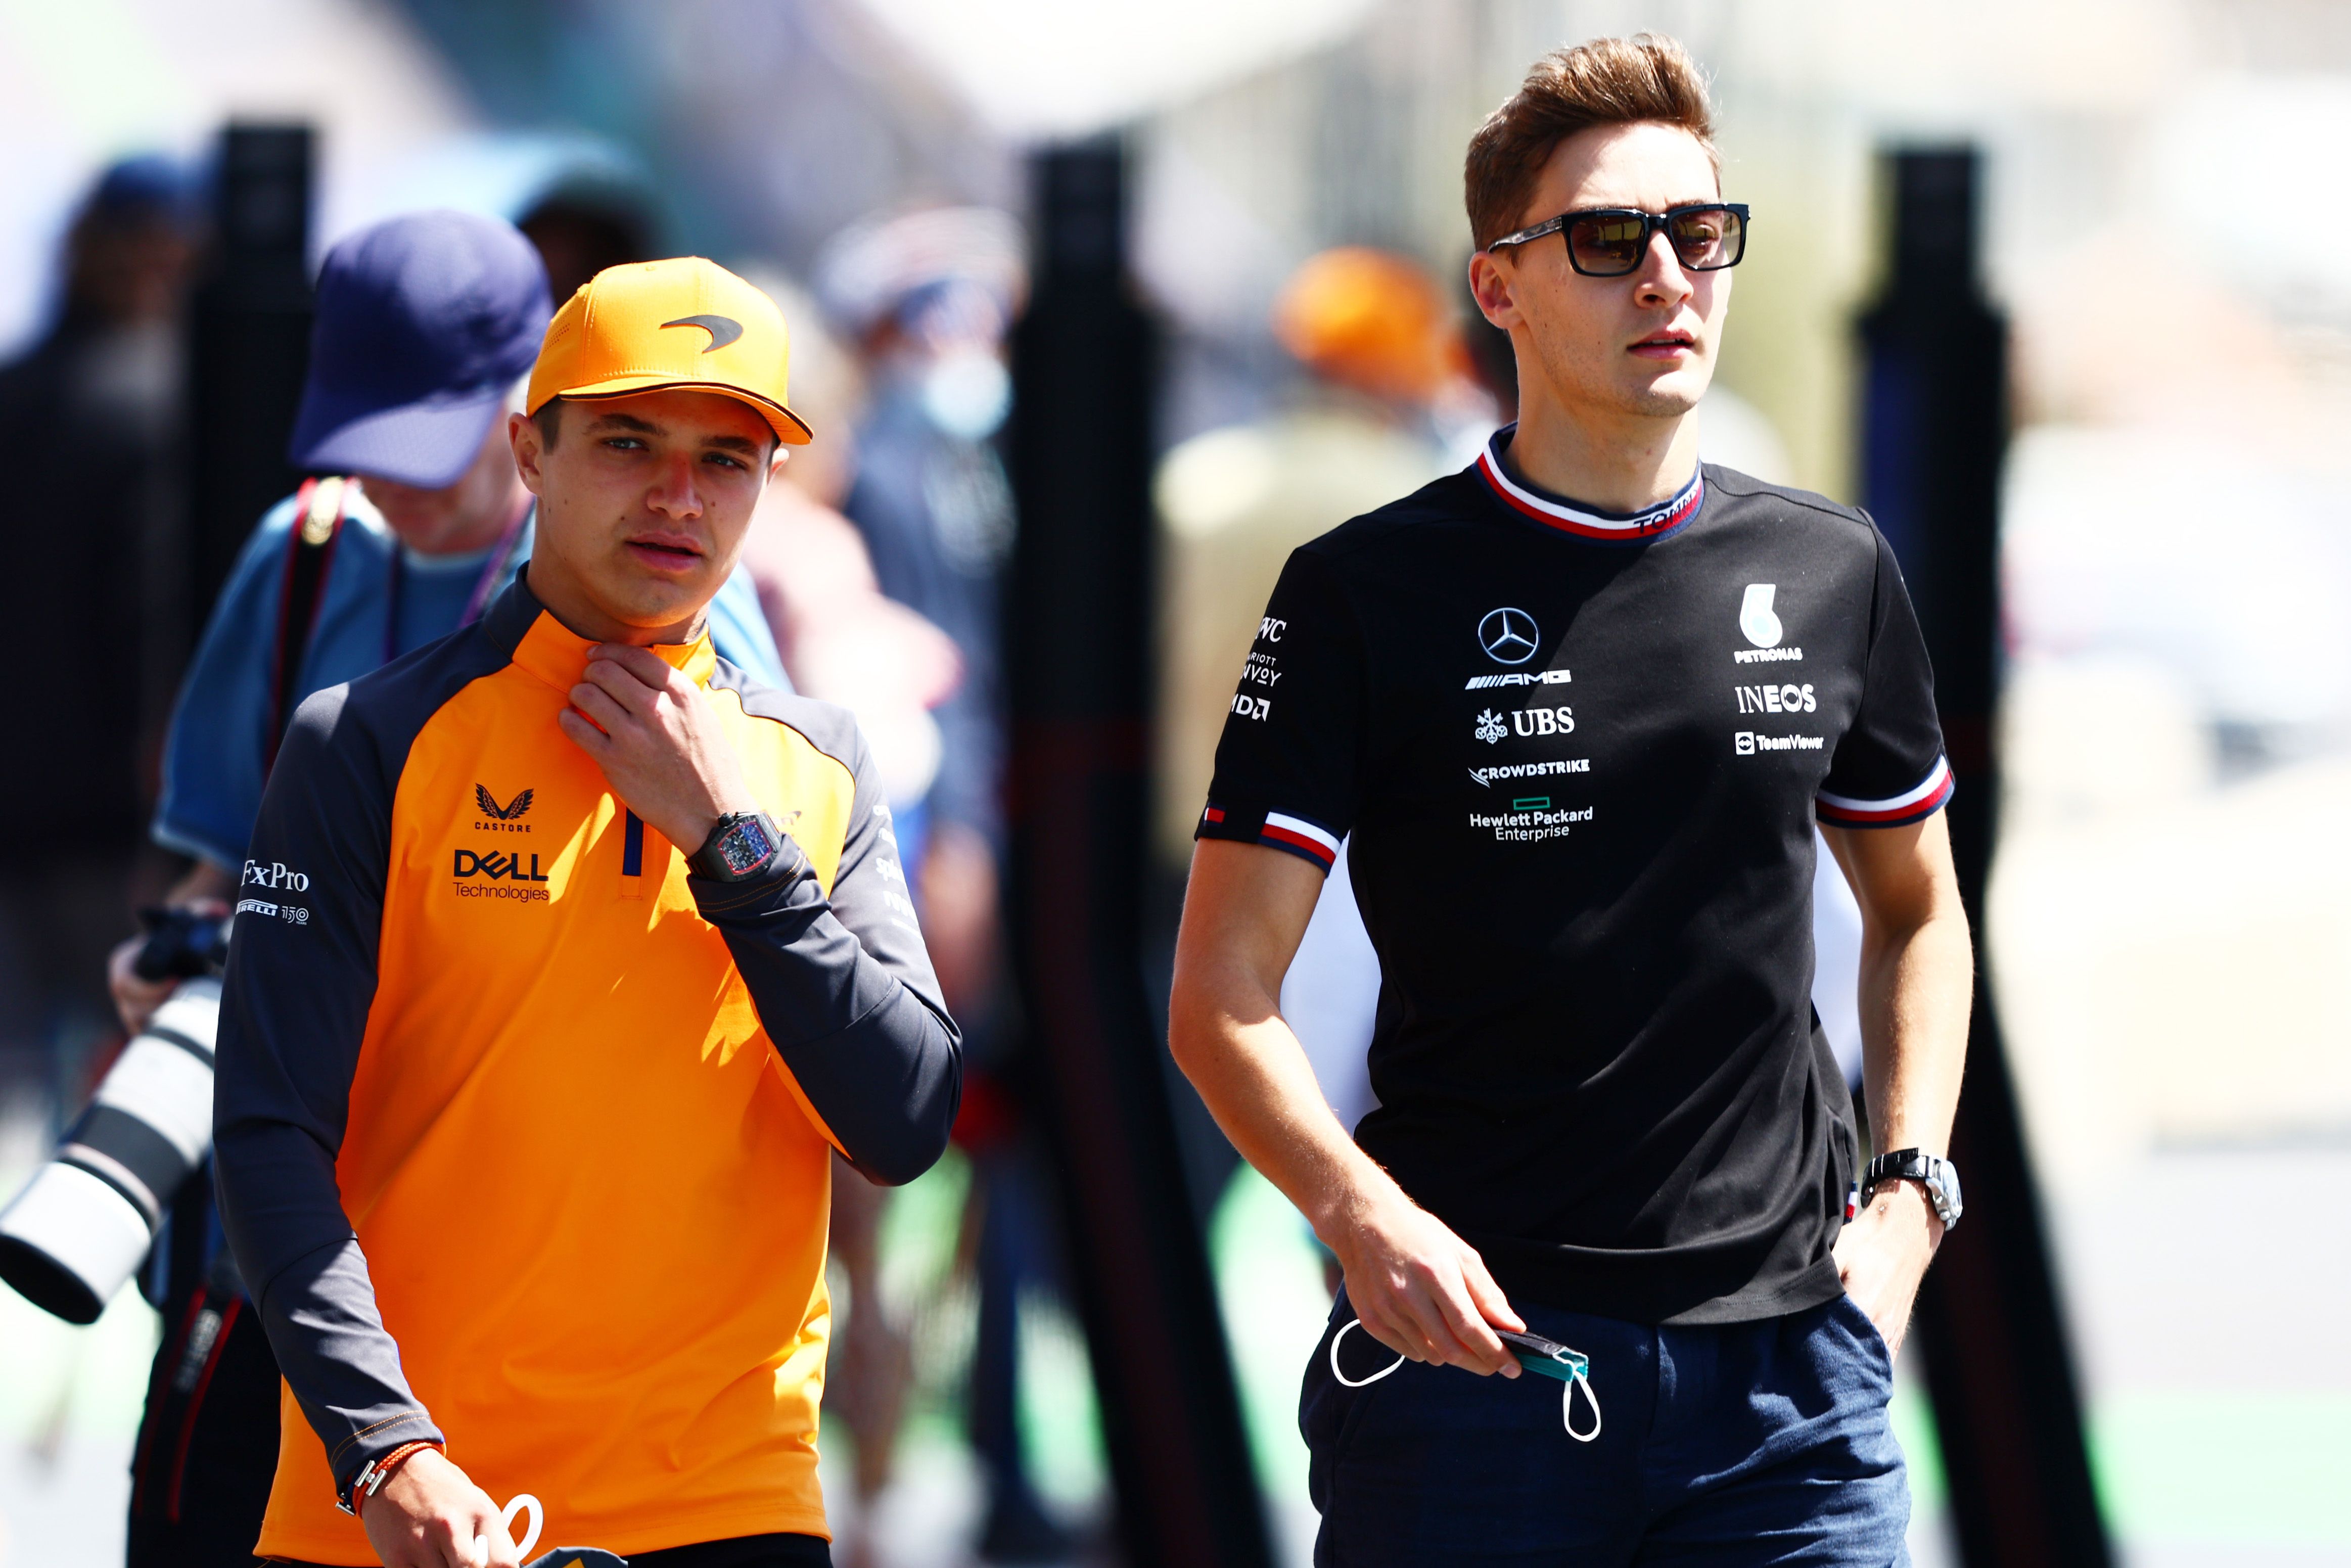 Norris and Russell in the F1 paddock.